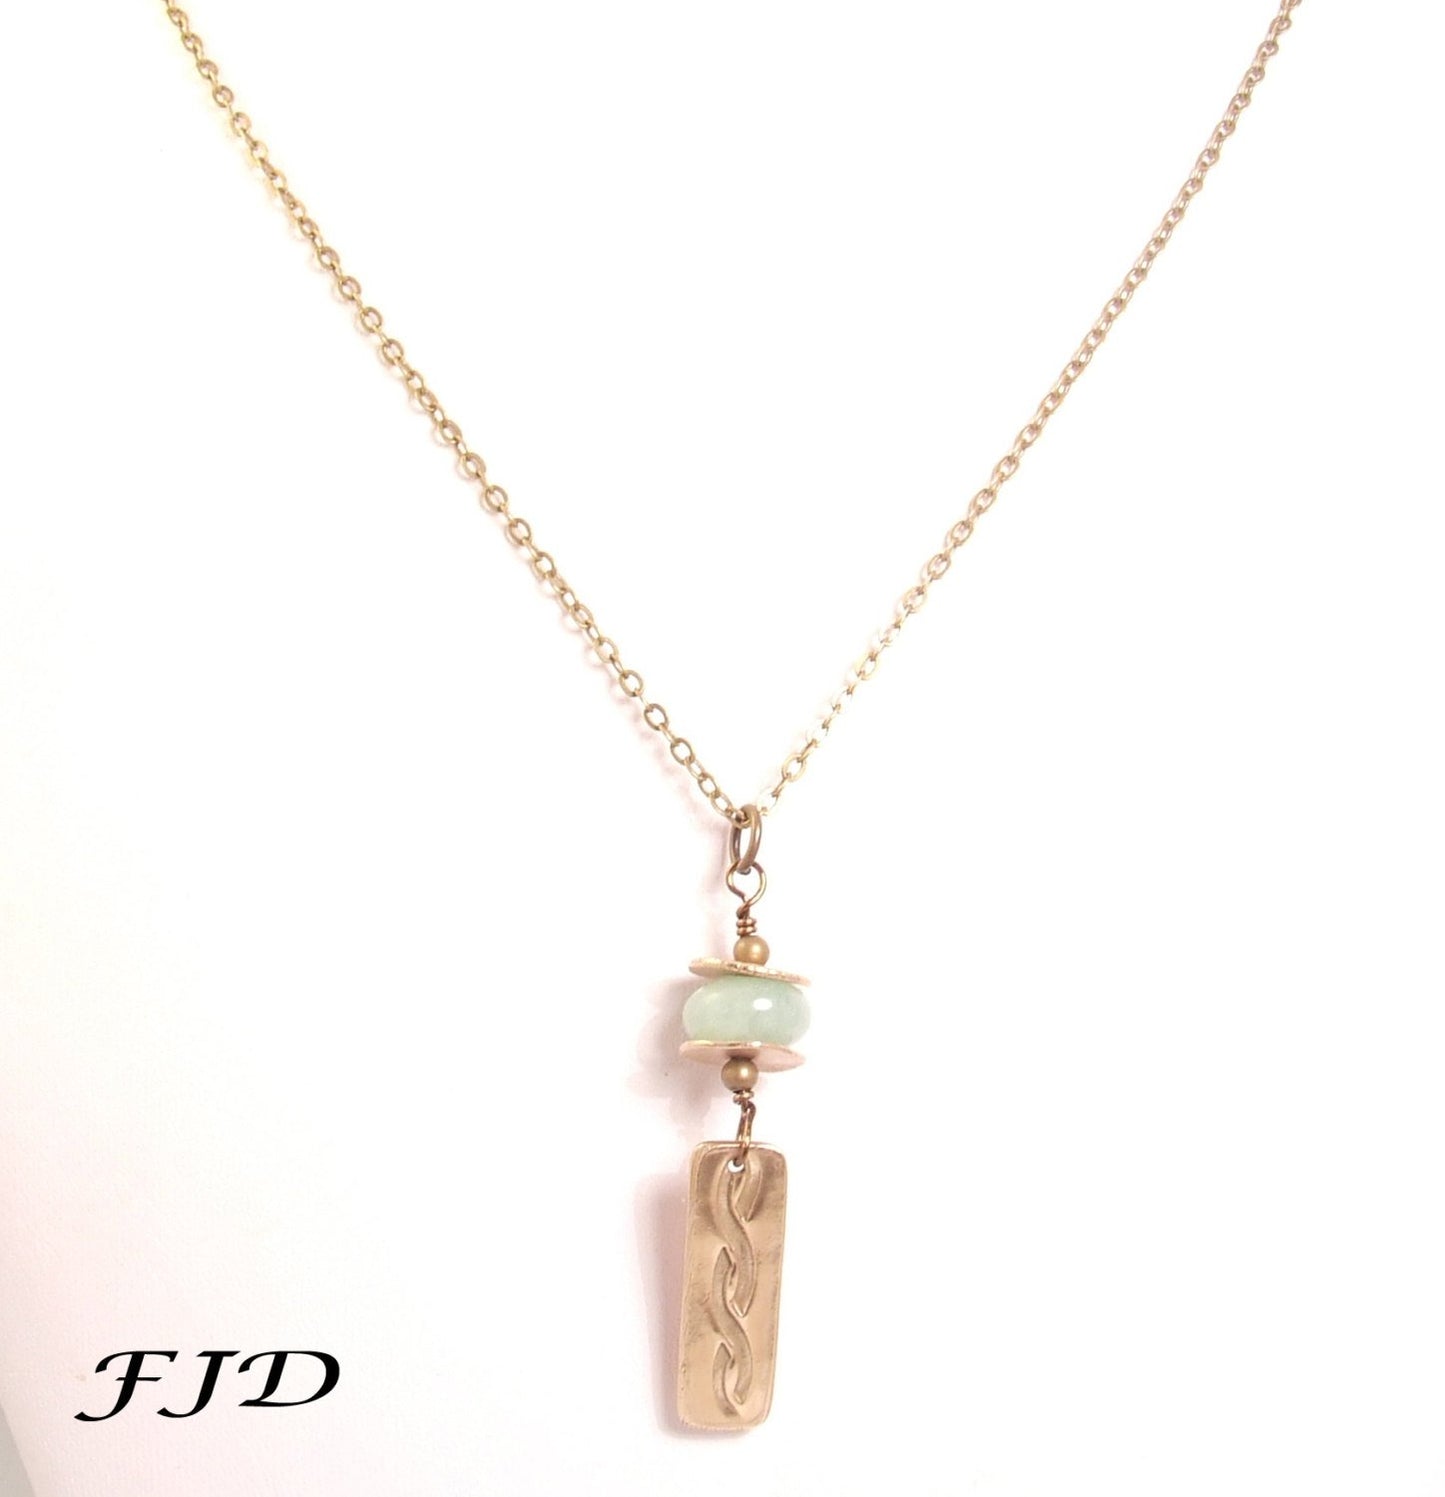 Hand Stamped Bronze and Gold Necklace